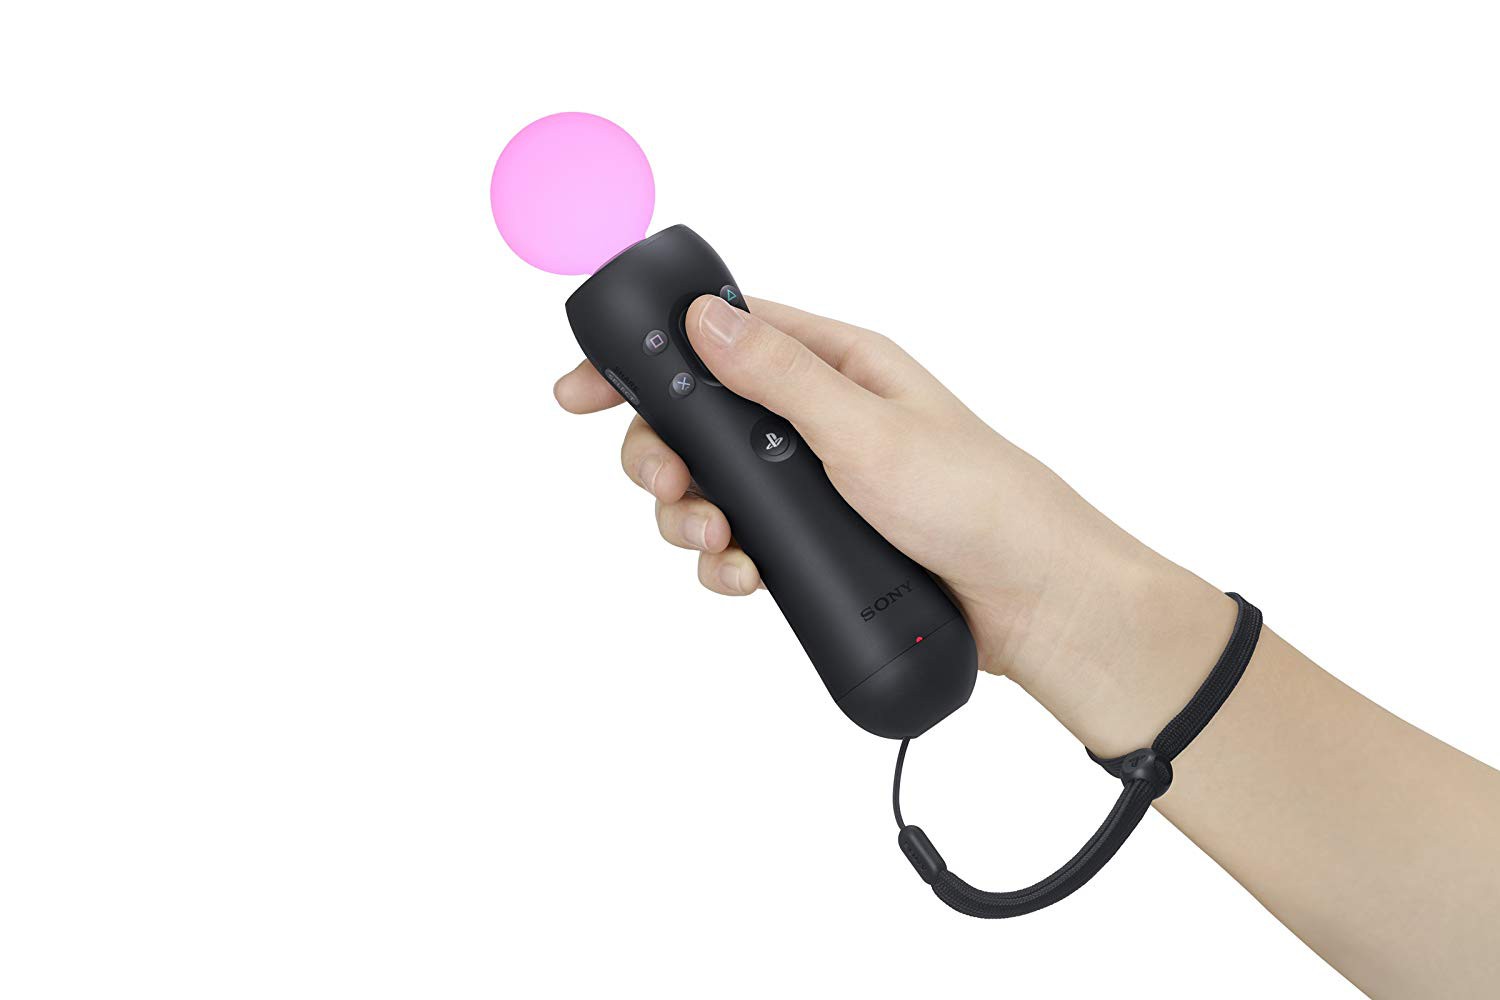 sony playstation move controller twin pack